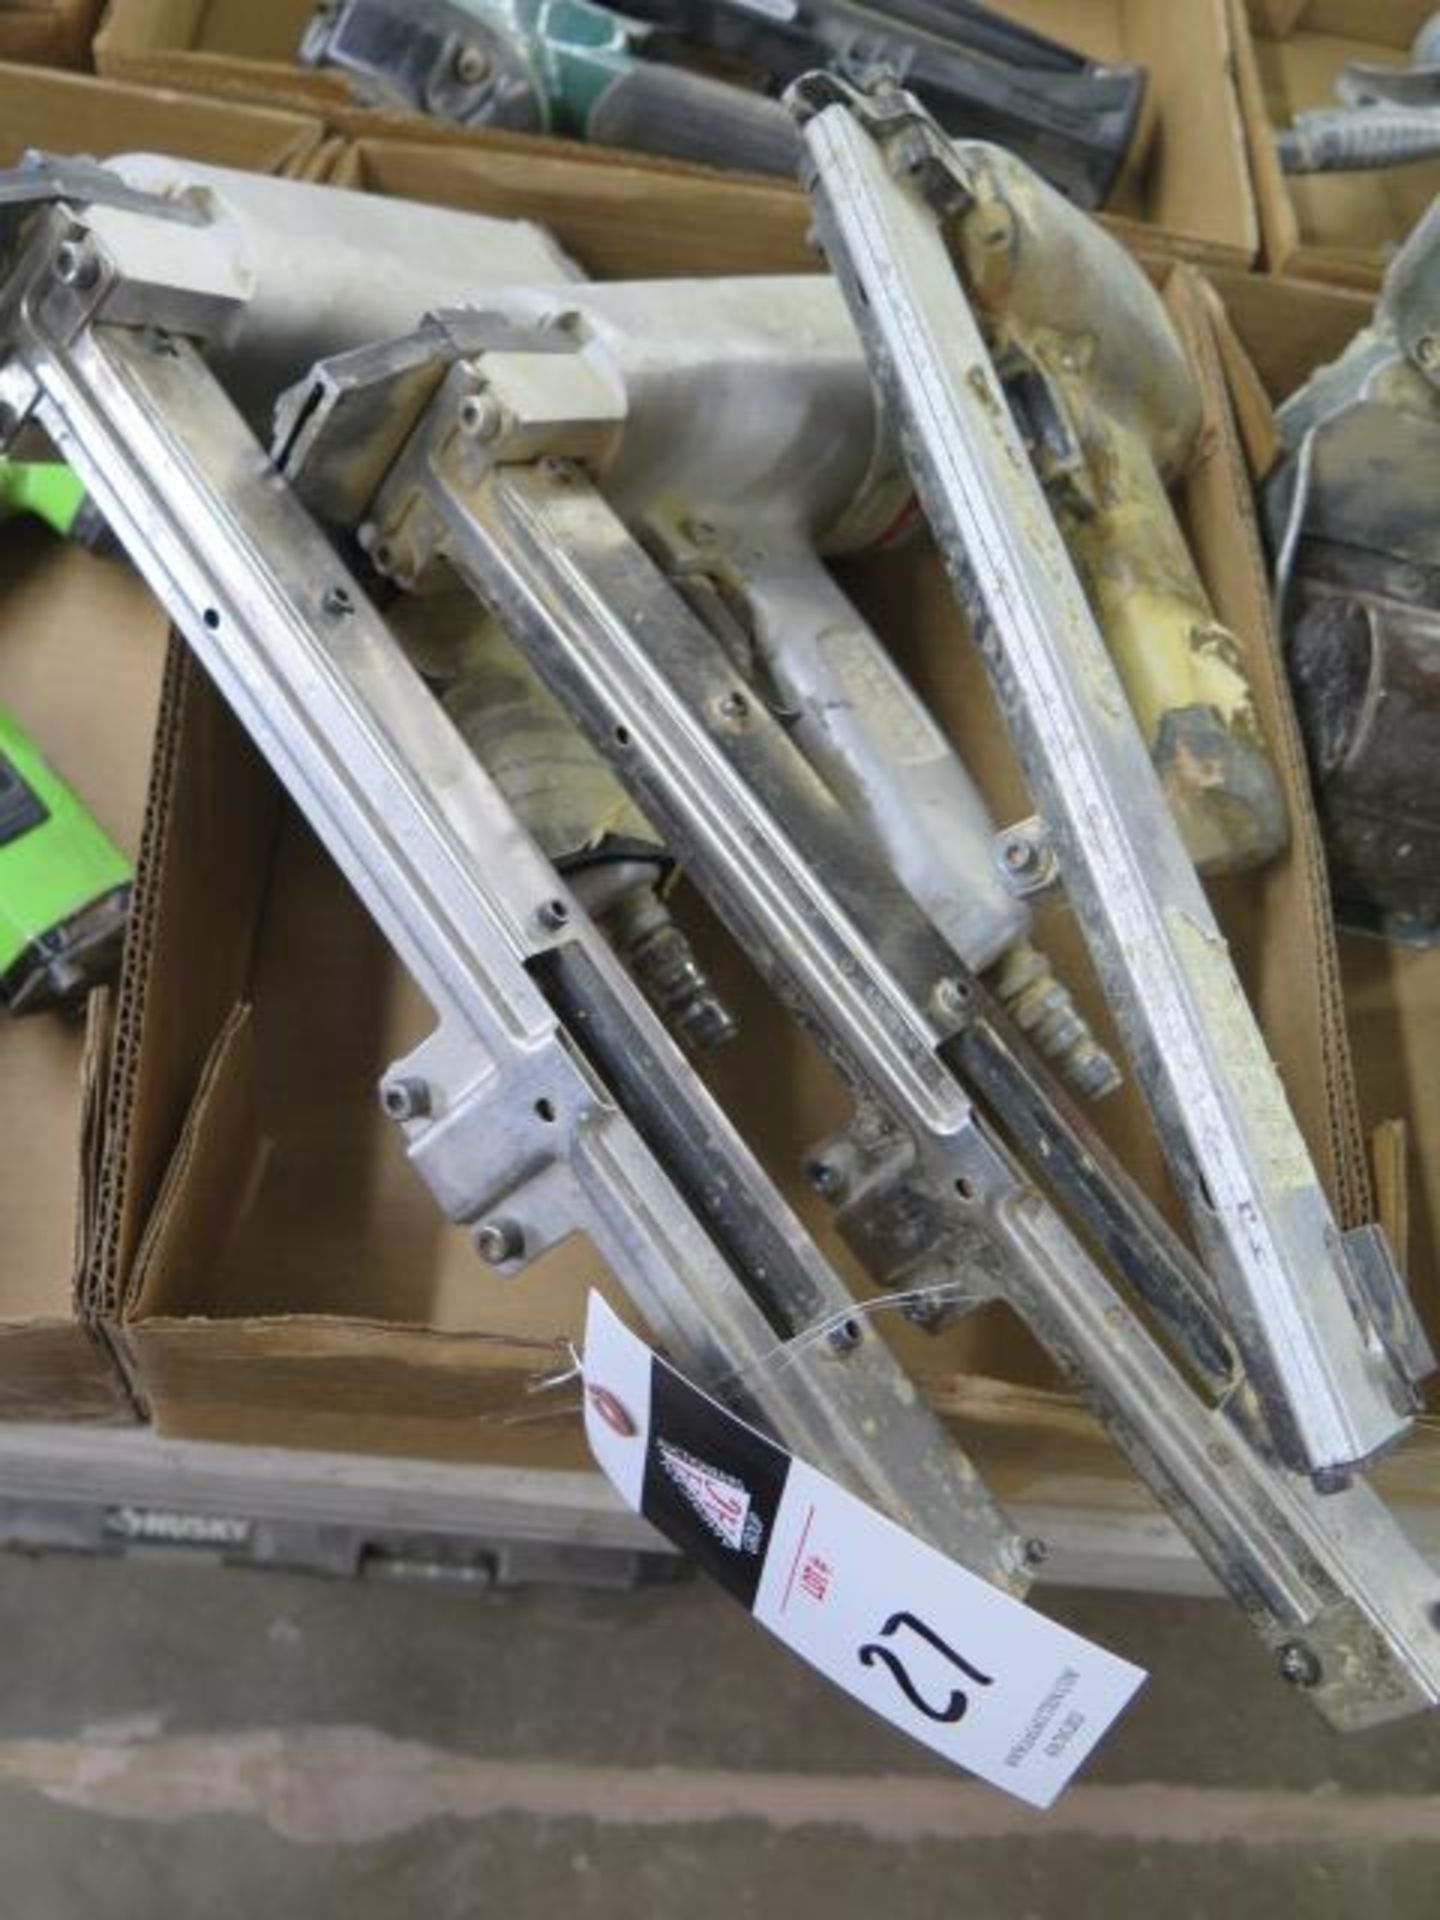 Pneumatic Nailer and Staplers (3) (SOLD AS-IS - NO WARRANTY)